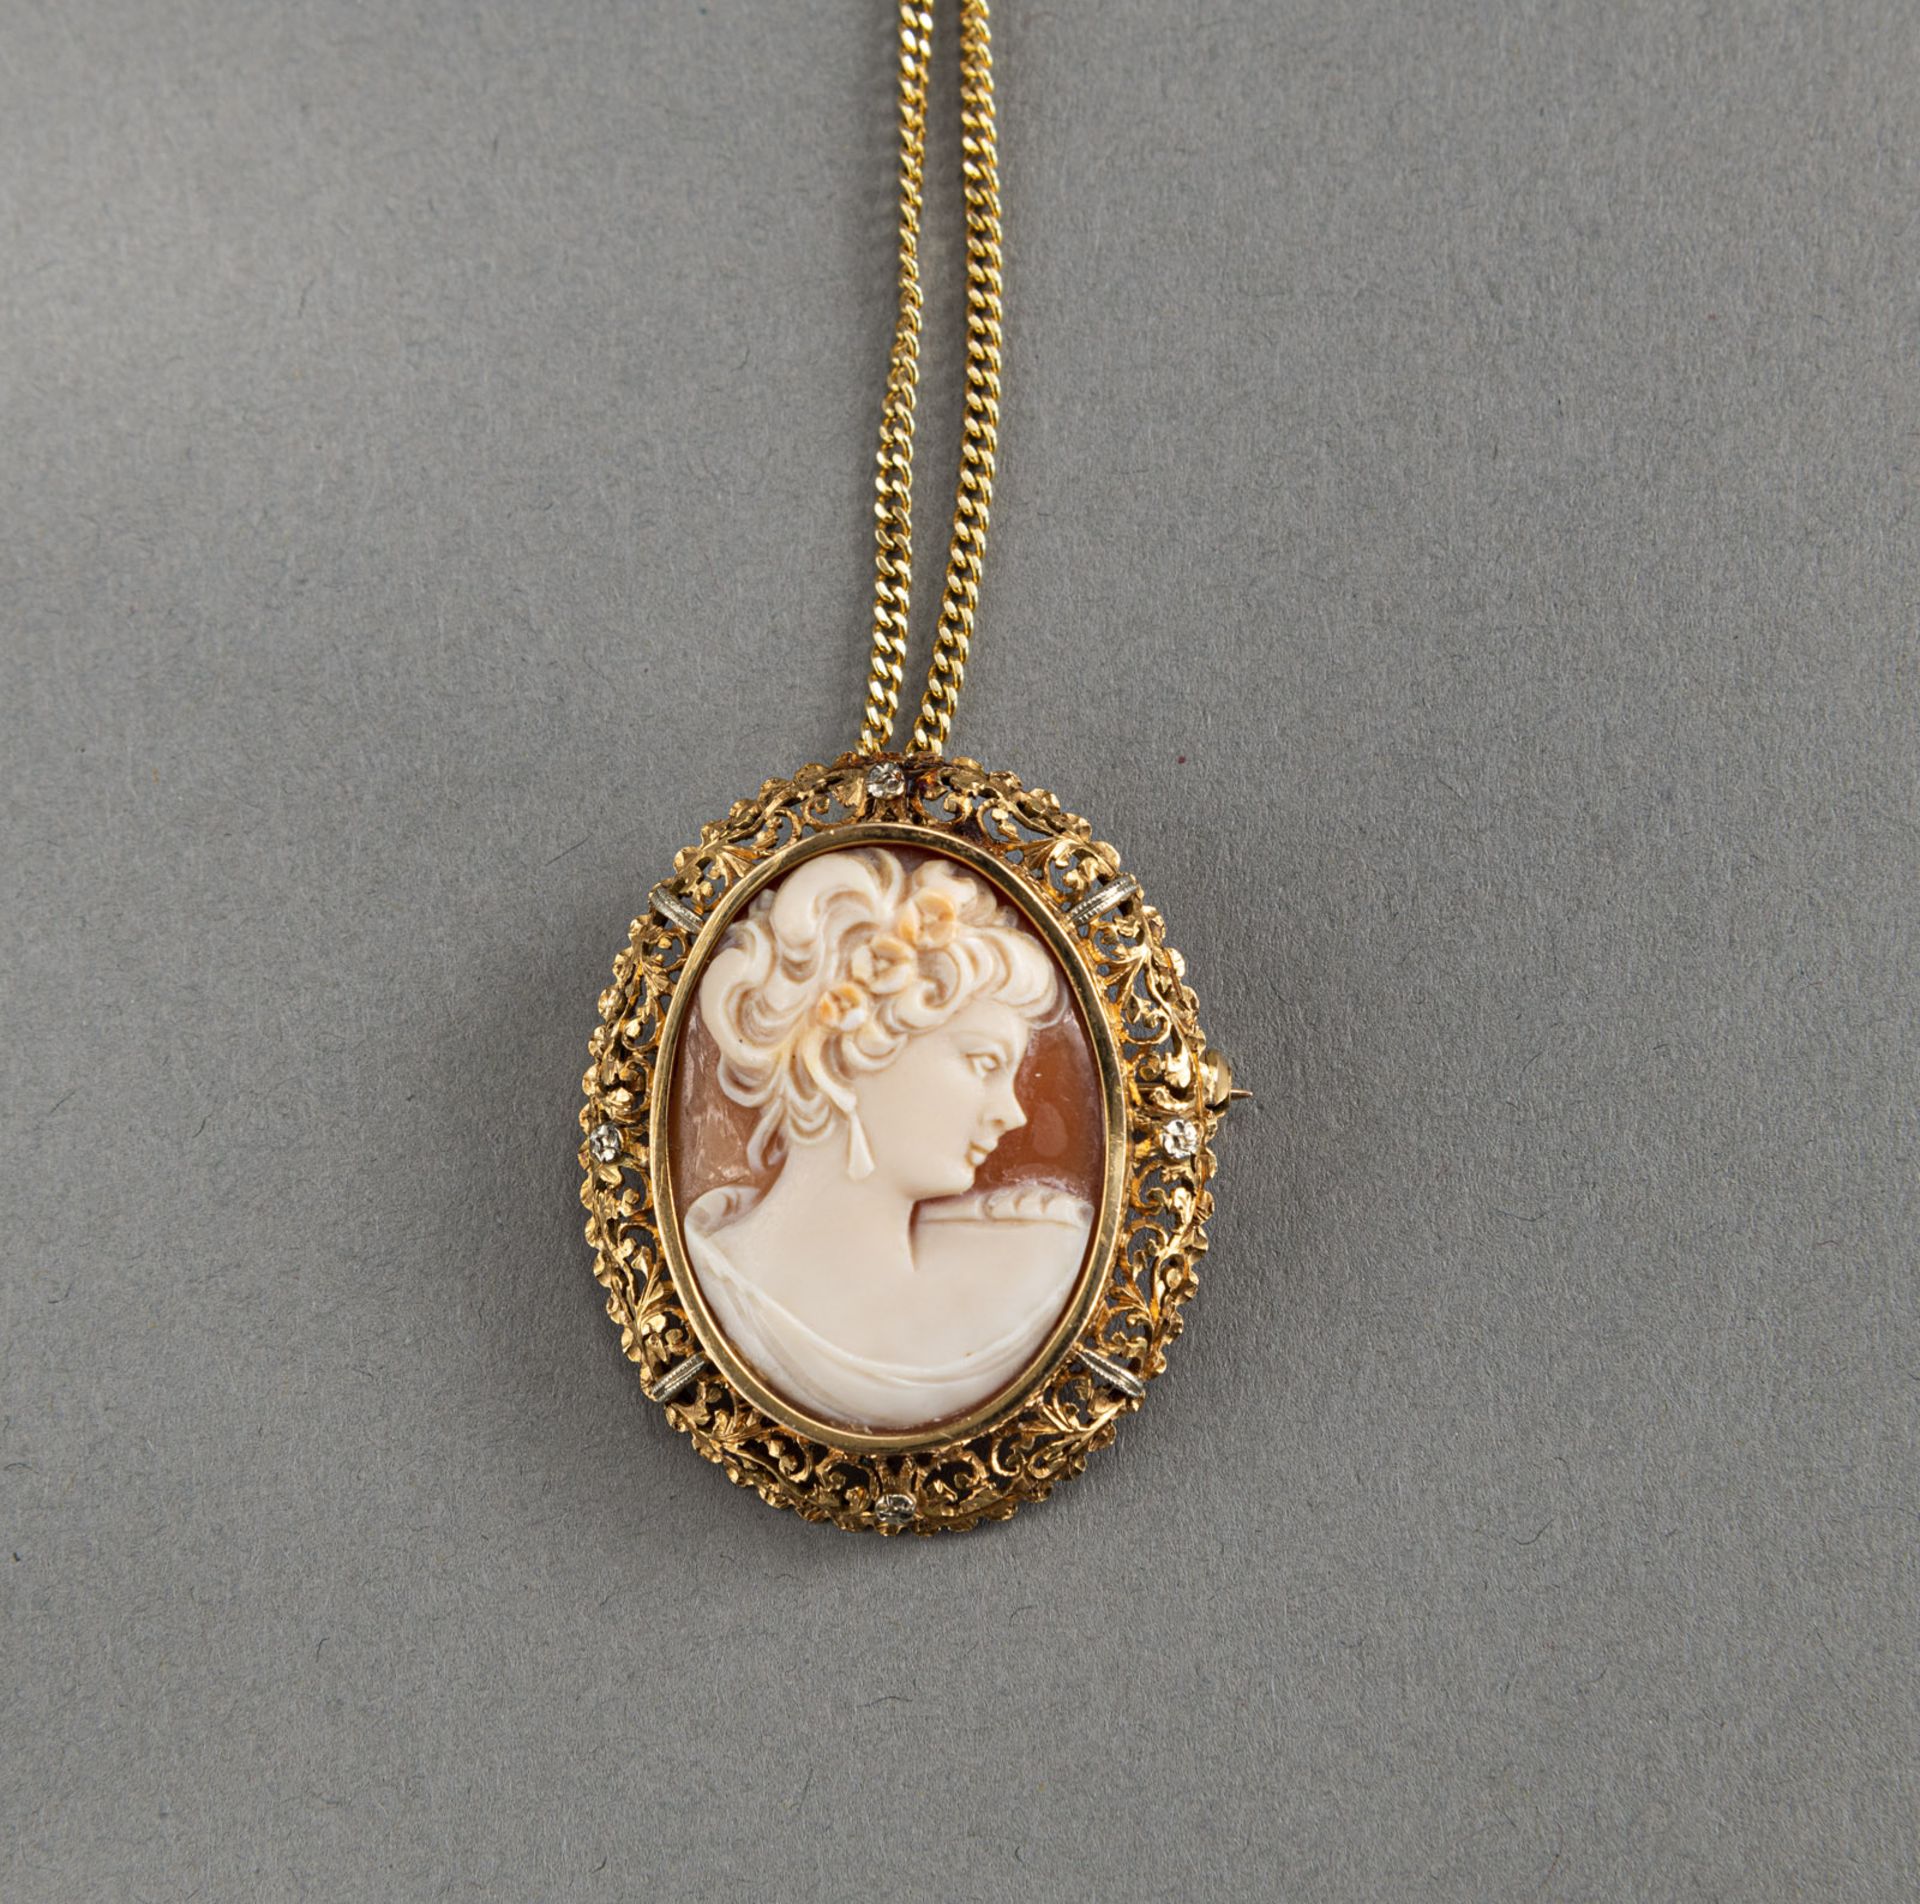 SHELL CAMEO BROOCH AND PENDANT WITH NECKLACE - Image 2 of 6